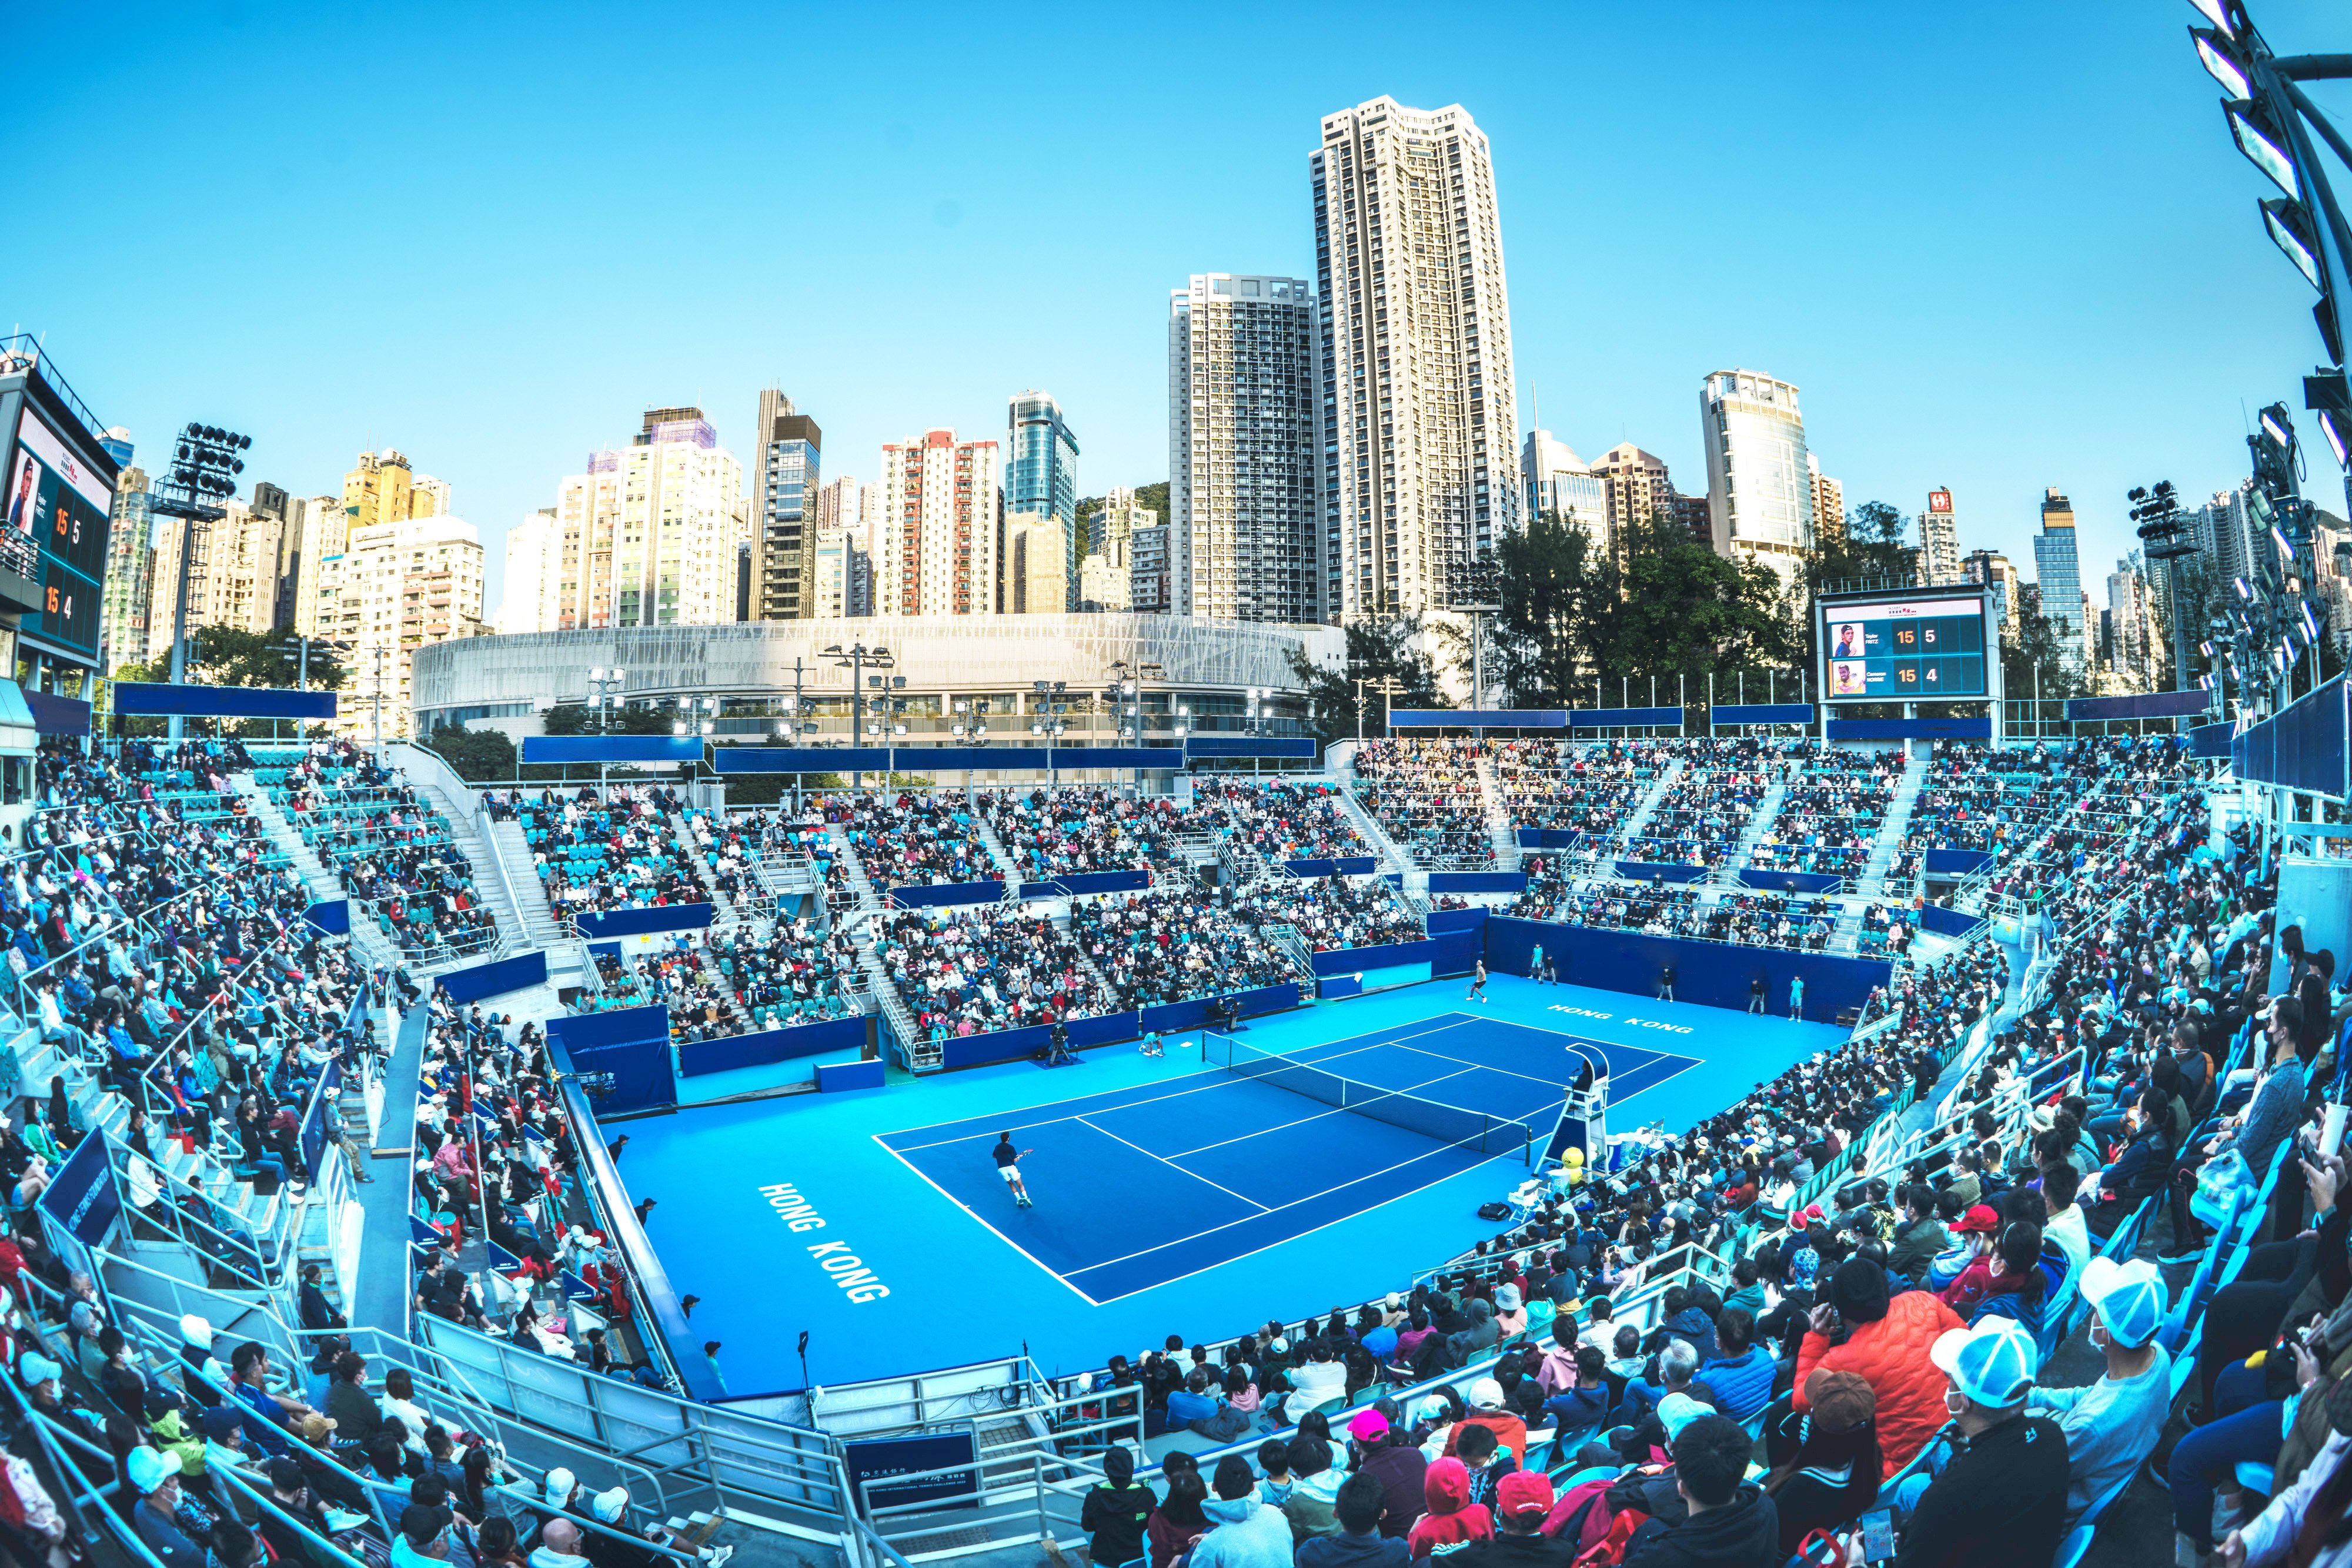 The Bank of China Hong Kong Tennis Open 2024 will take place at Victoria Park Tennis Stadium